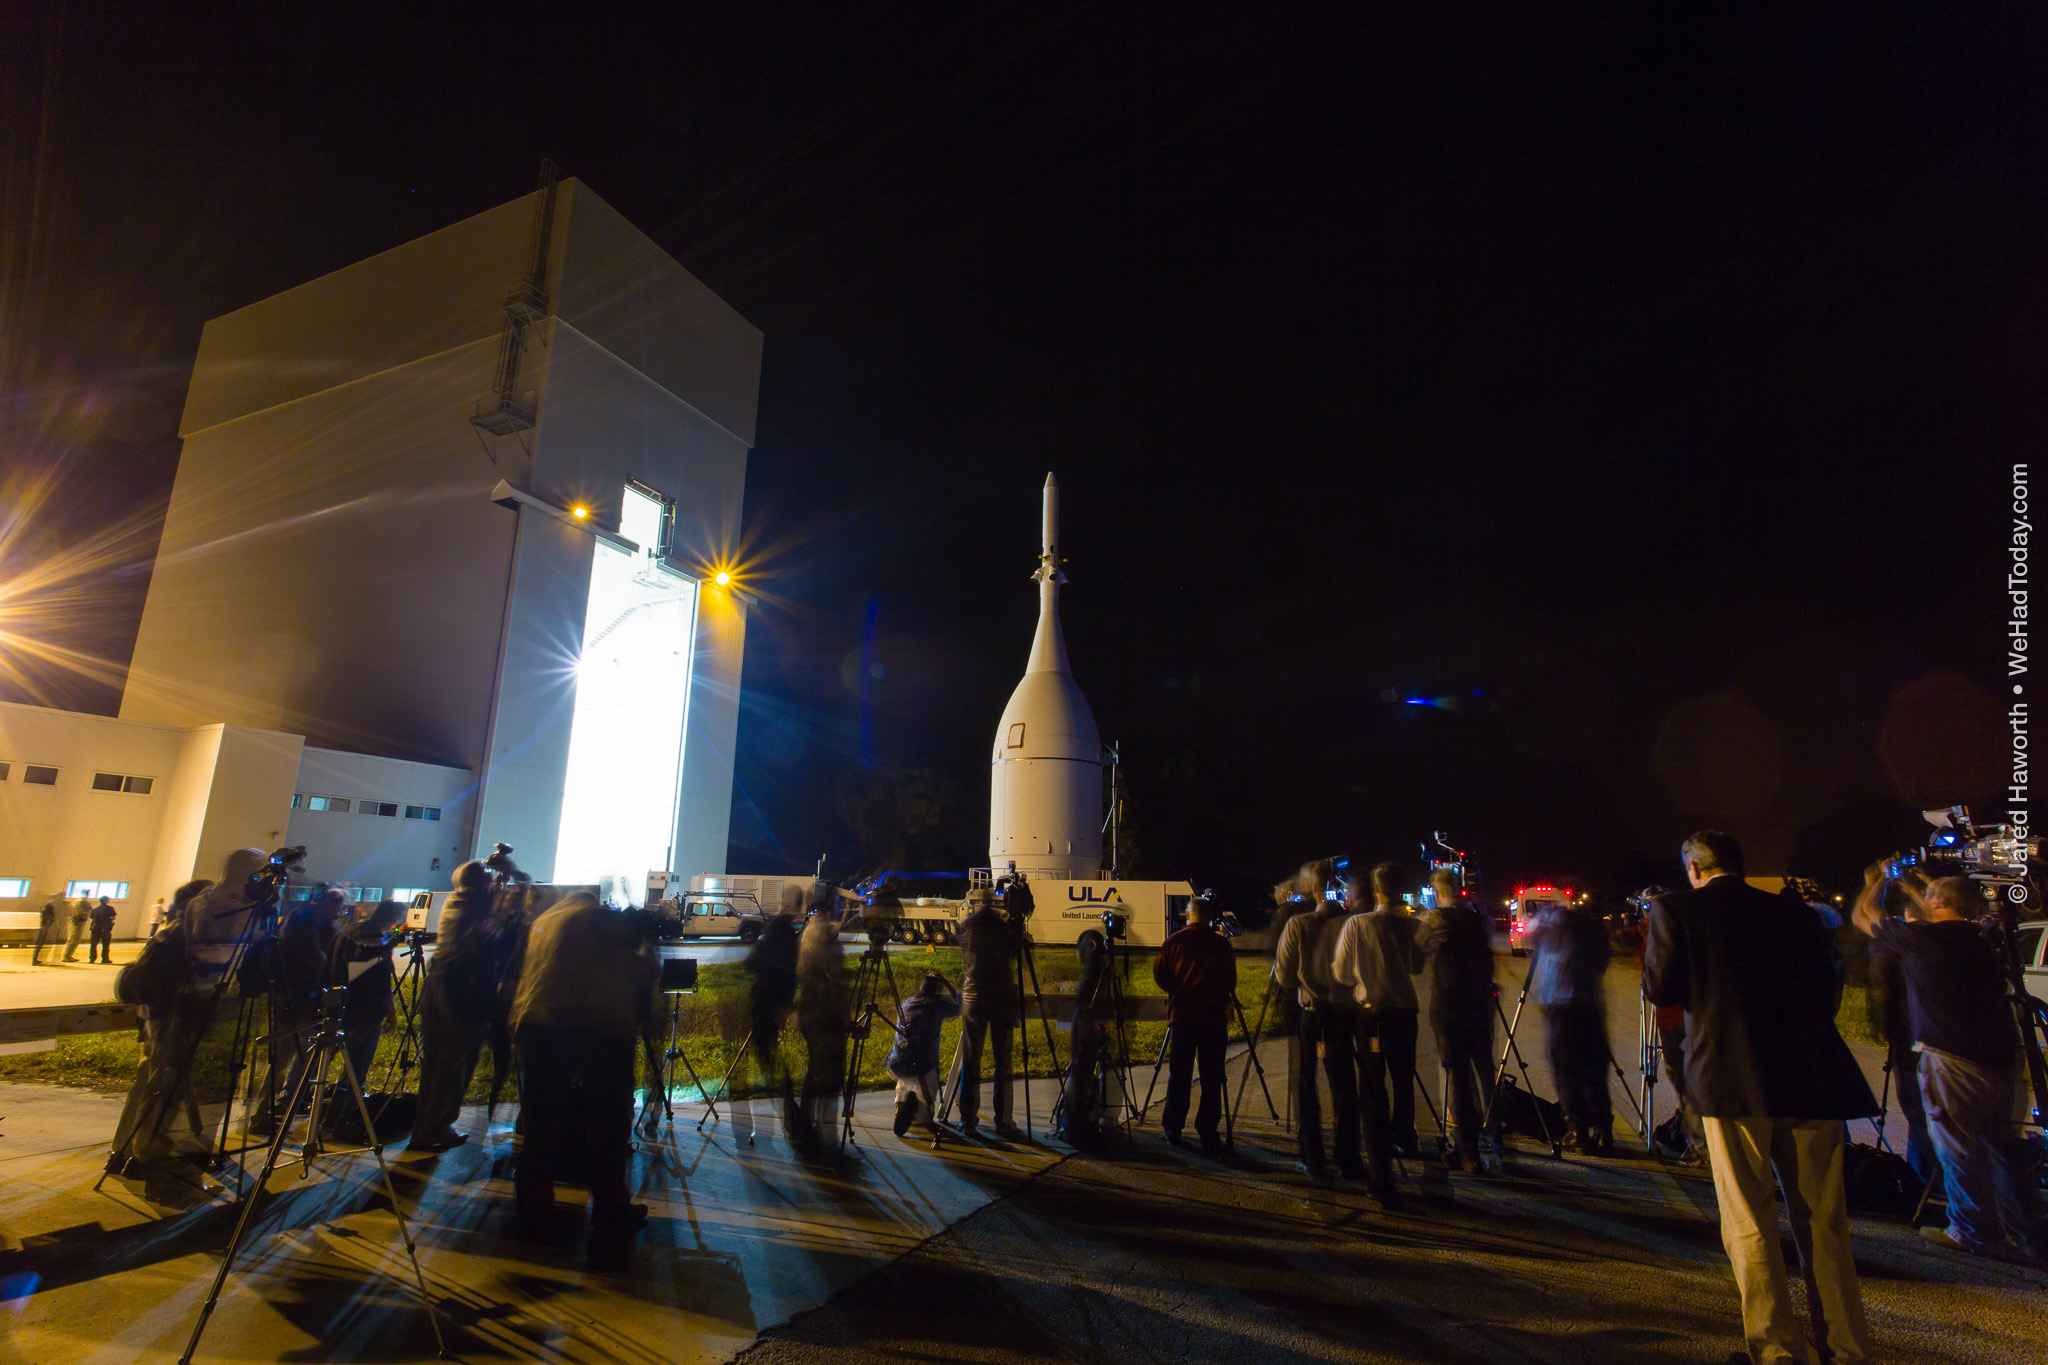 Members of the press get their first view of the completed Orion stack.